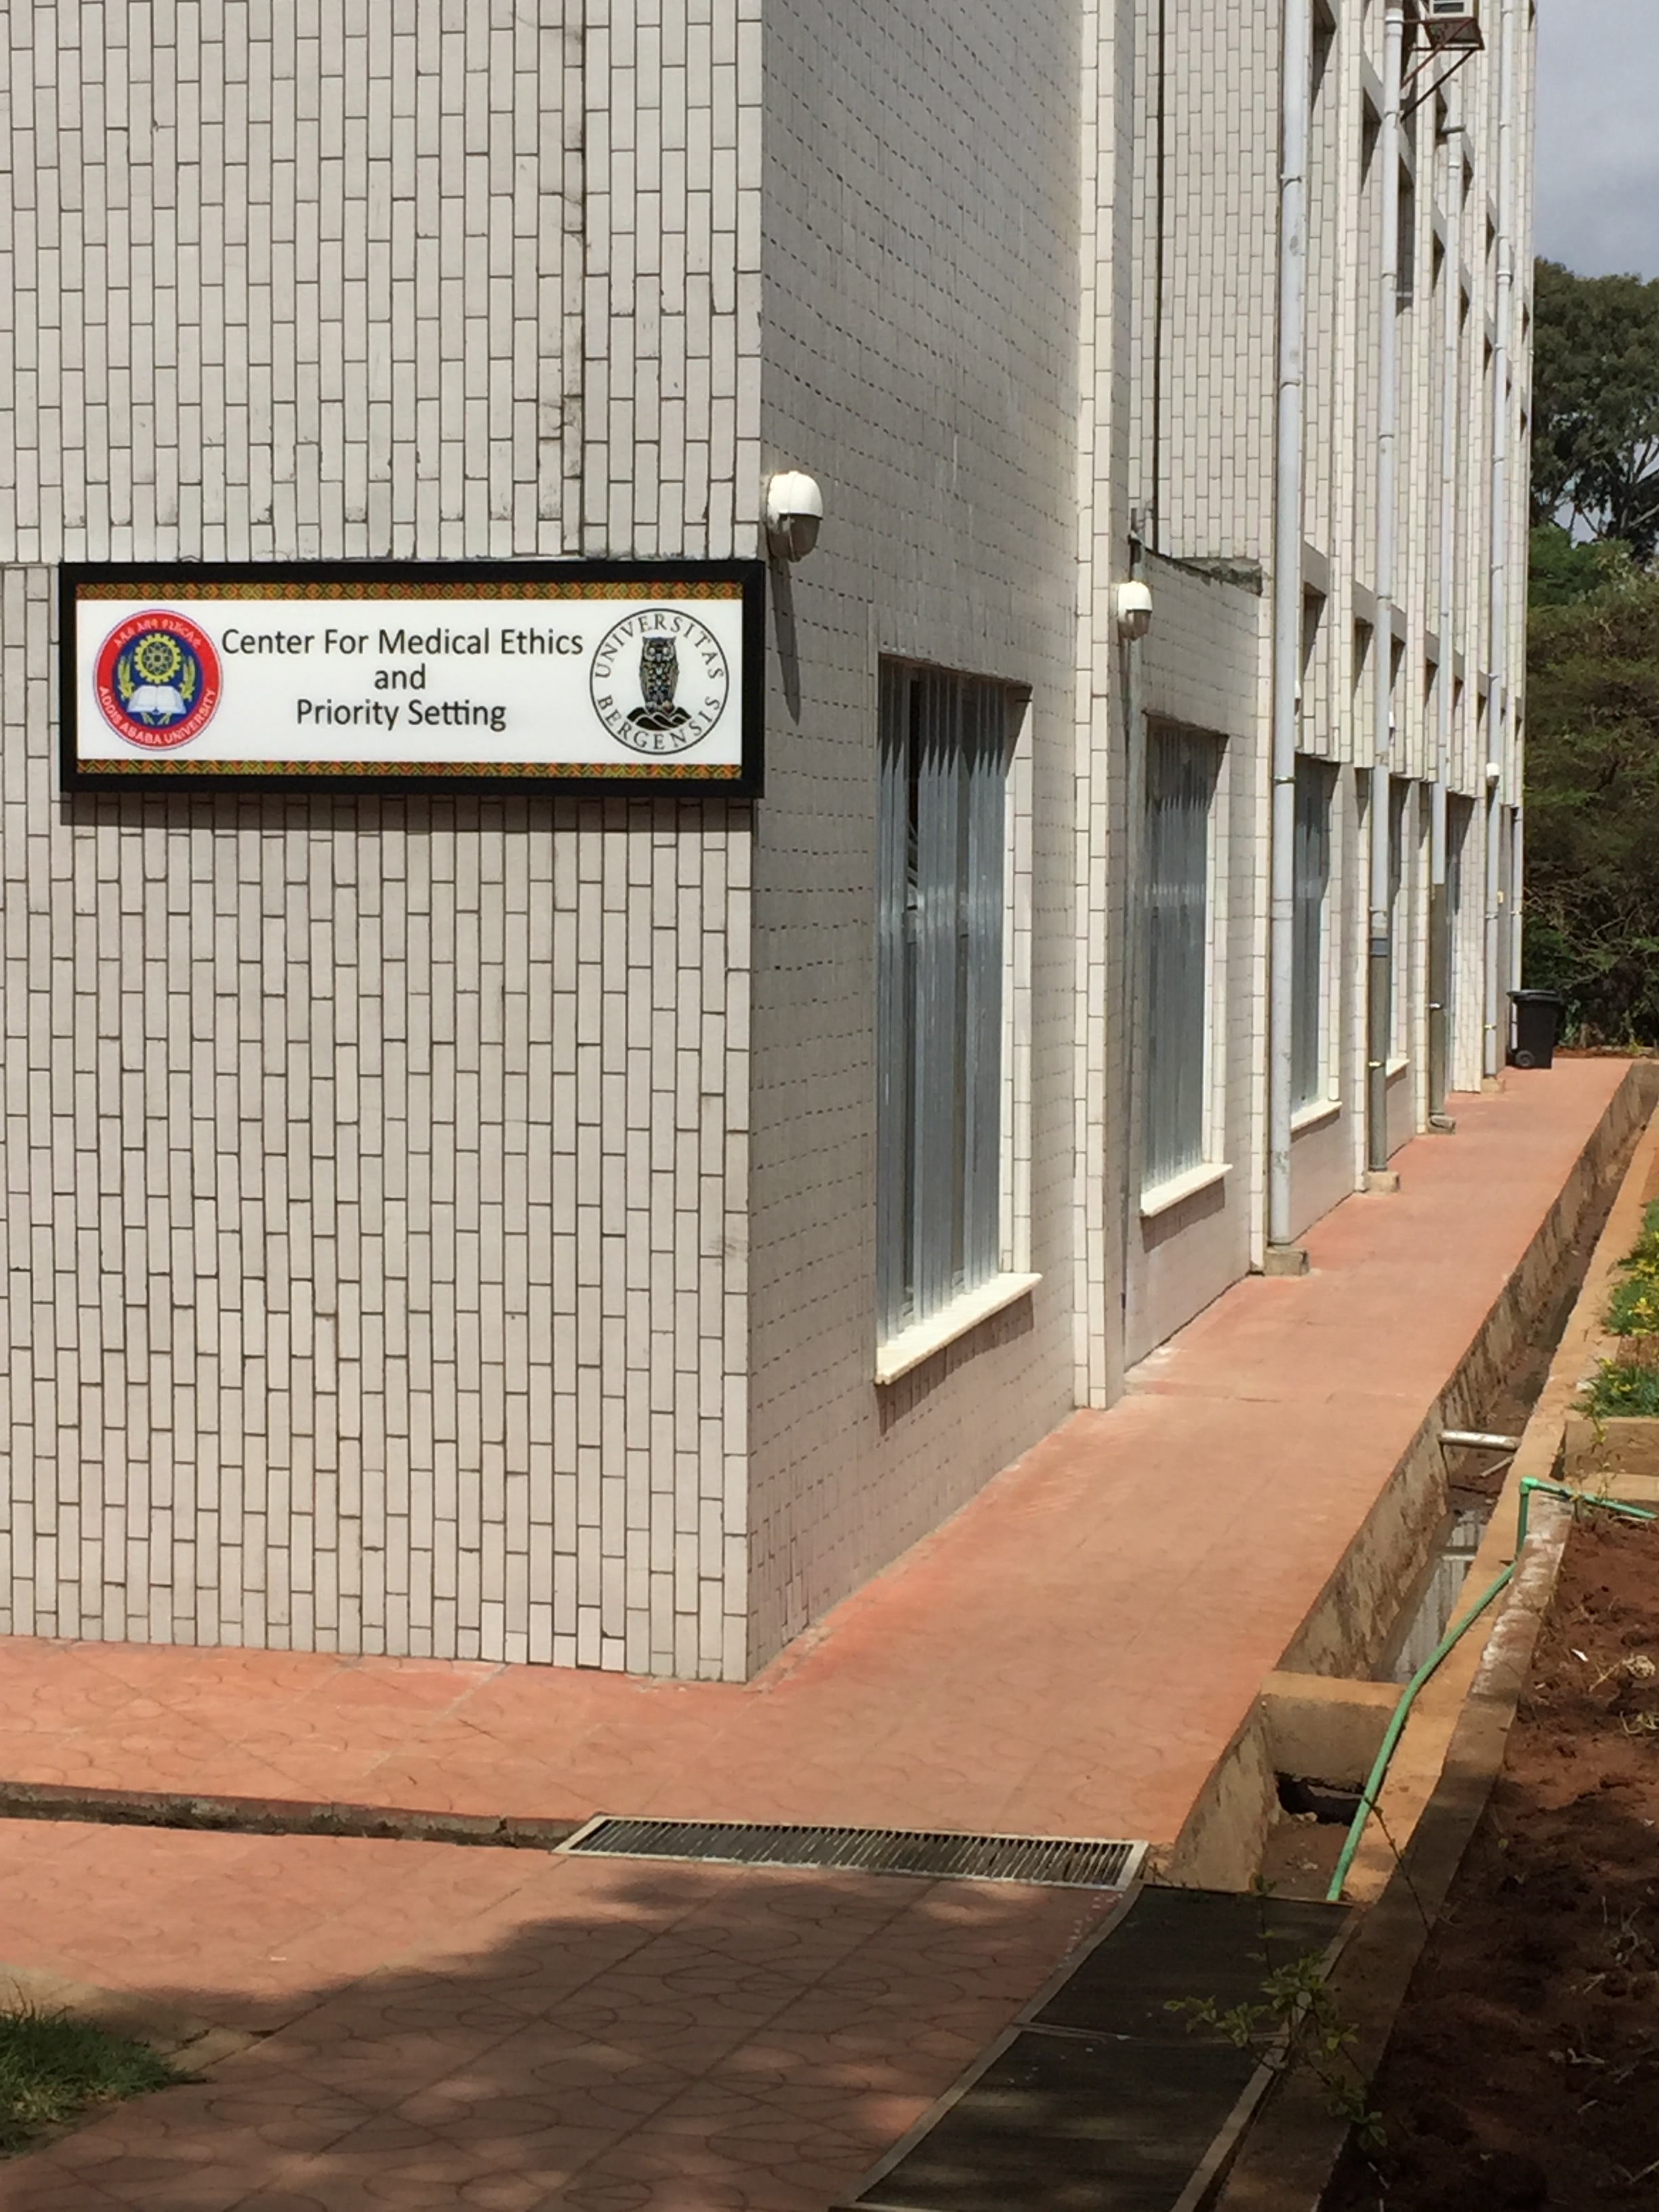 New ethics center opened in Addis Ababa | Bergen Centre for Ethics and